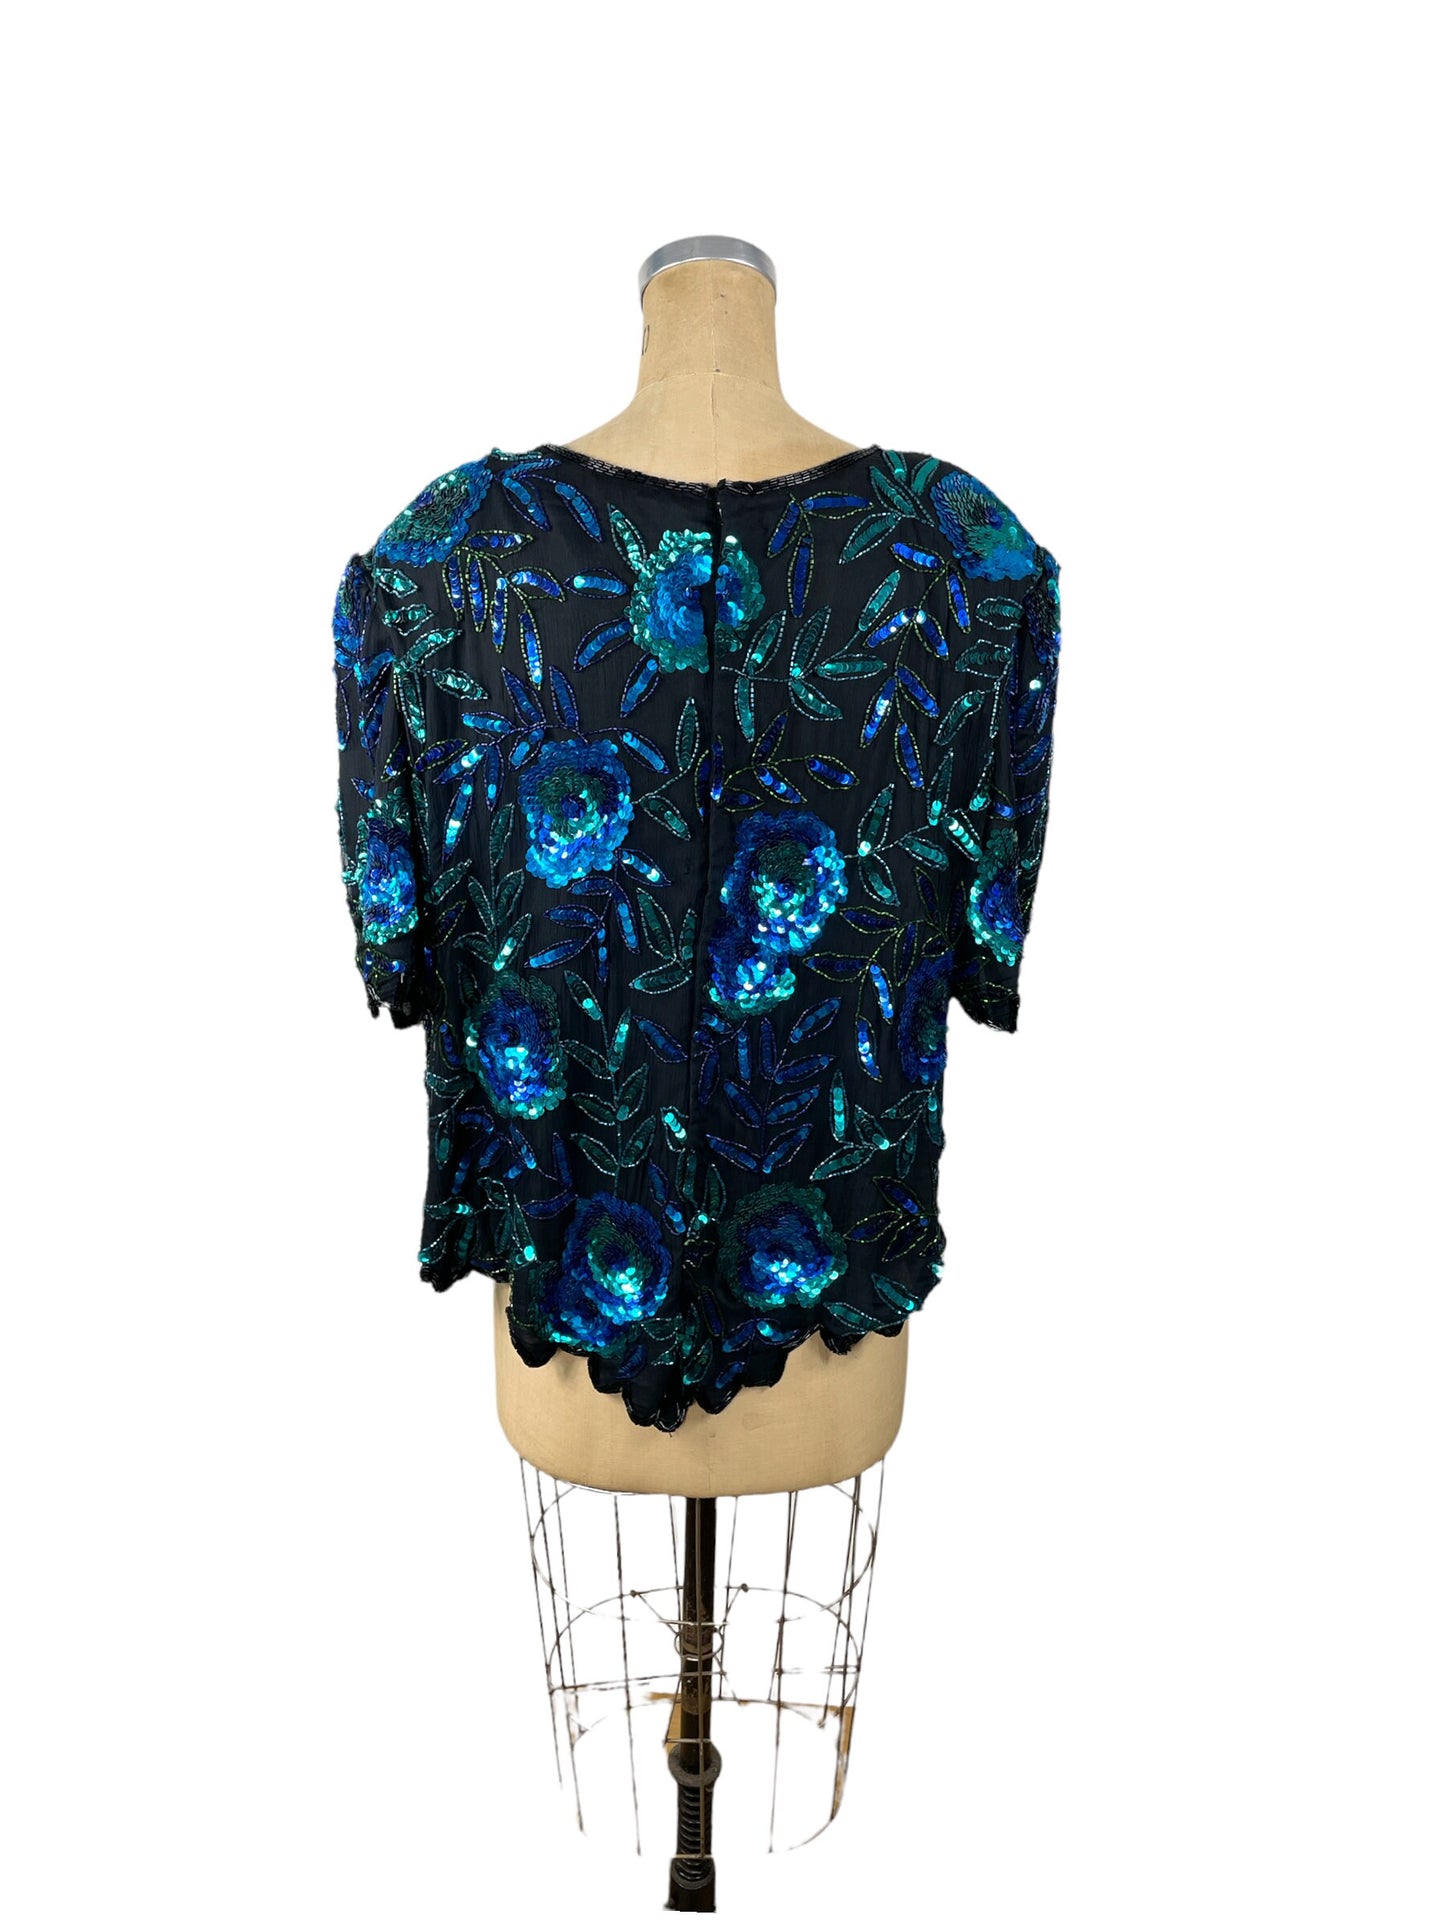 1980s sequin silk top blue teal black Size 2X Plus size by Laurence Kazar